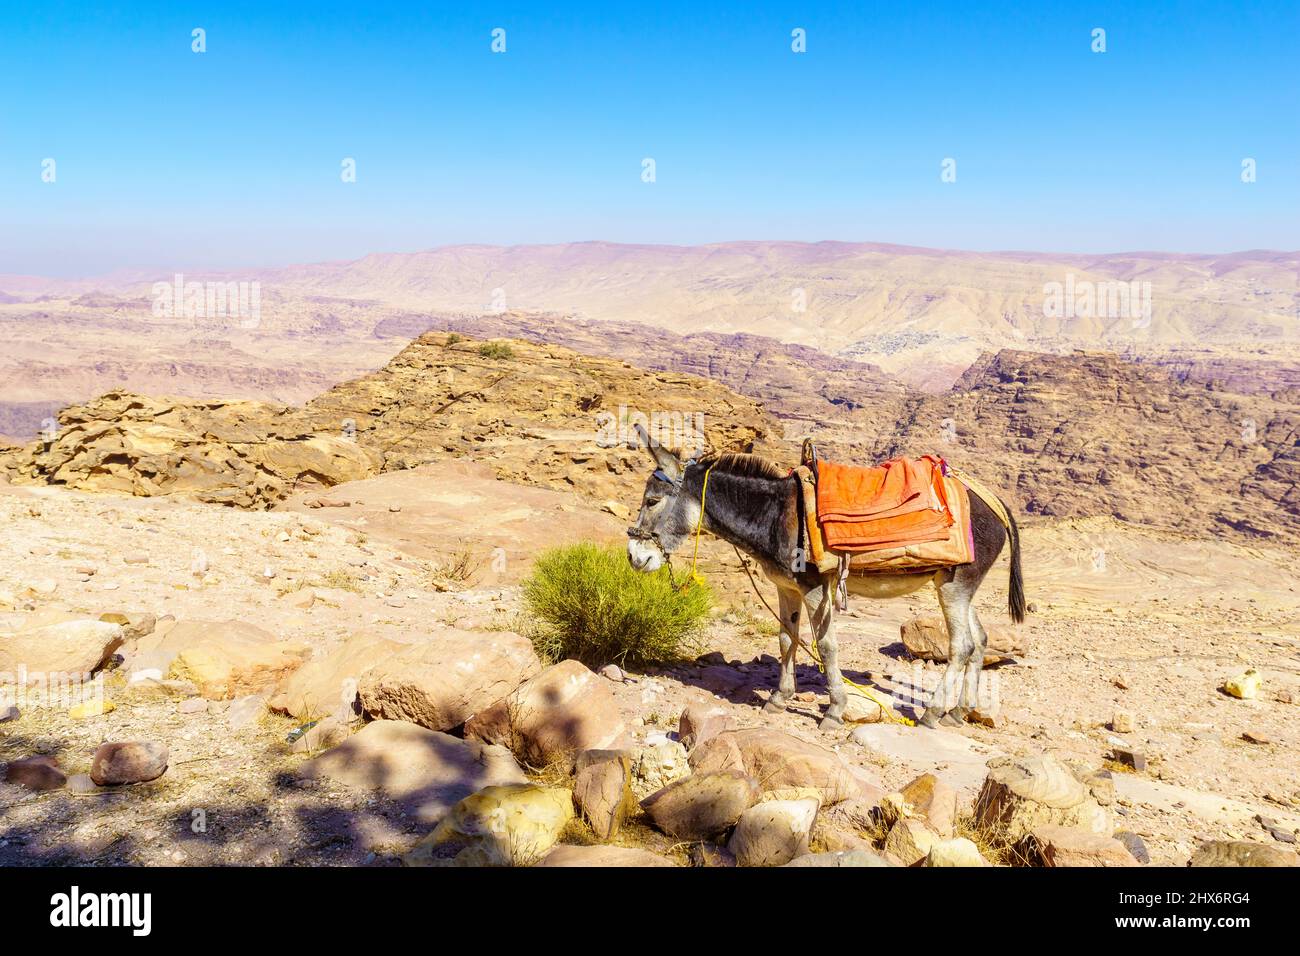 View of desert mountain landscape, with a donkey, near Petra, in Southern Jordan Stock Photo